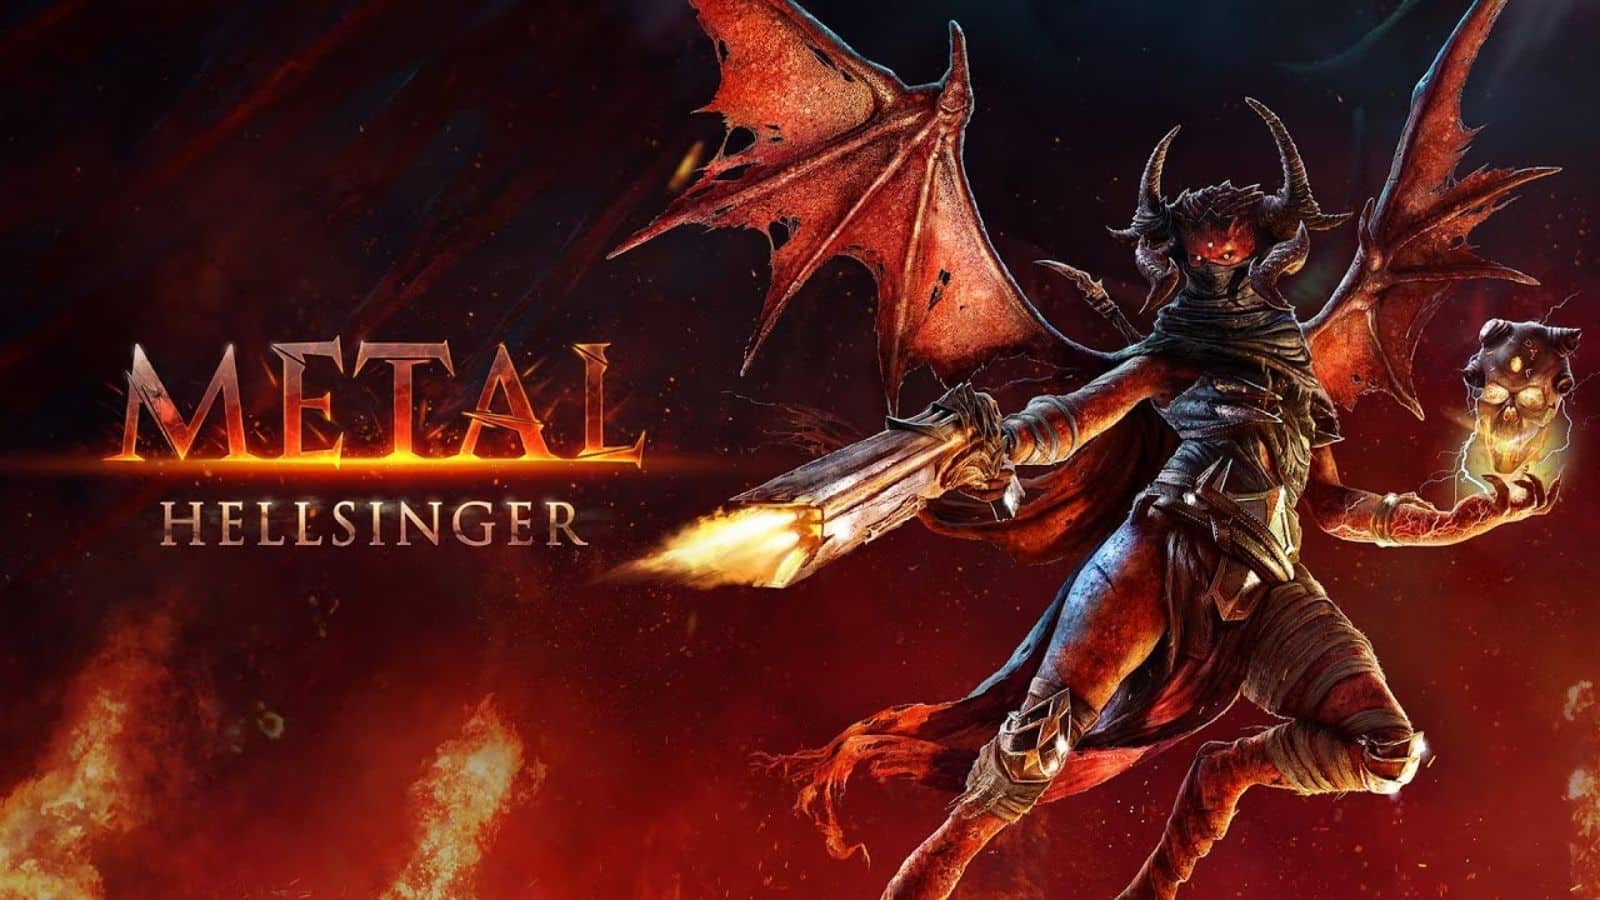 Metal Hellsinger Release Date, Trailer, And Gameplay - What We Know So Far